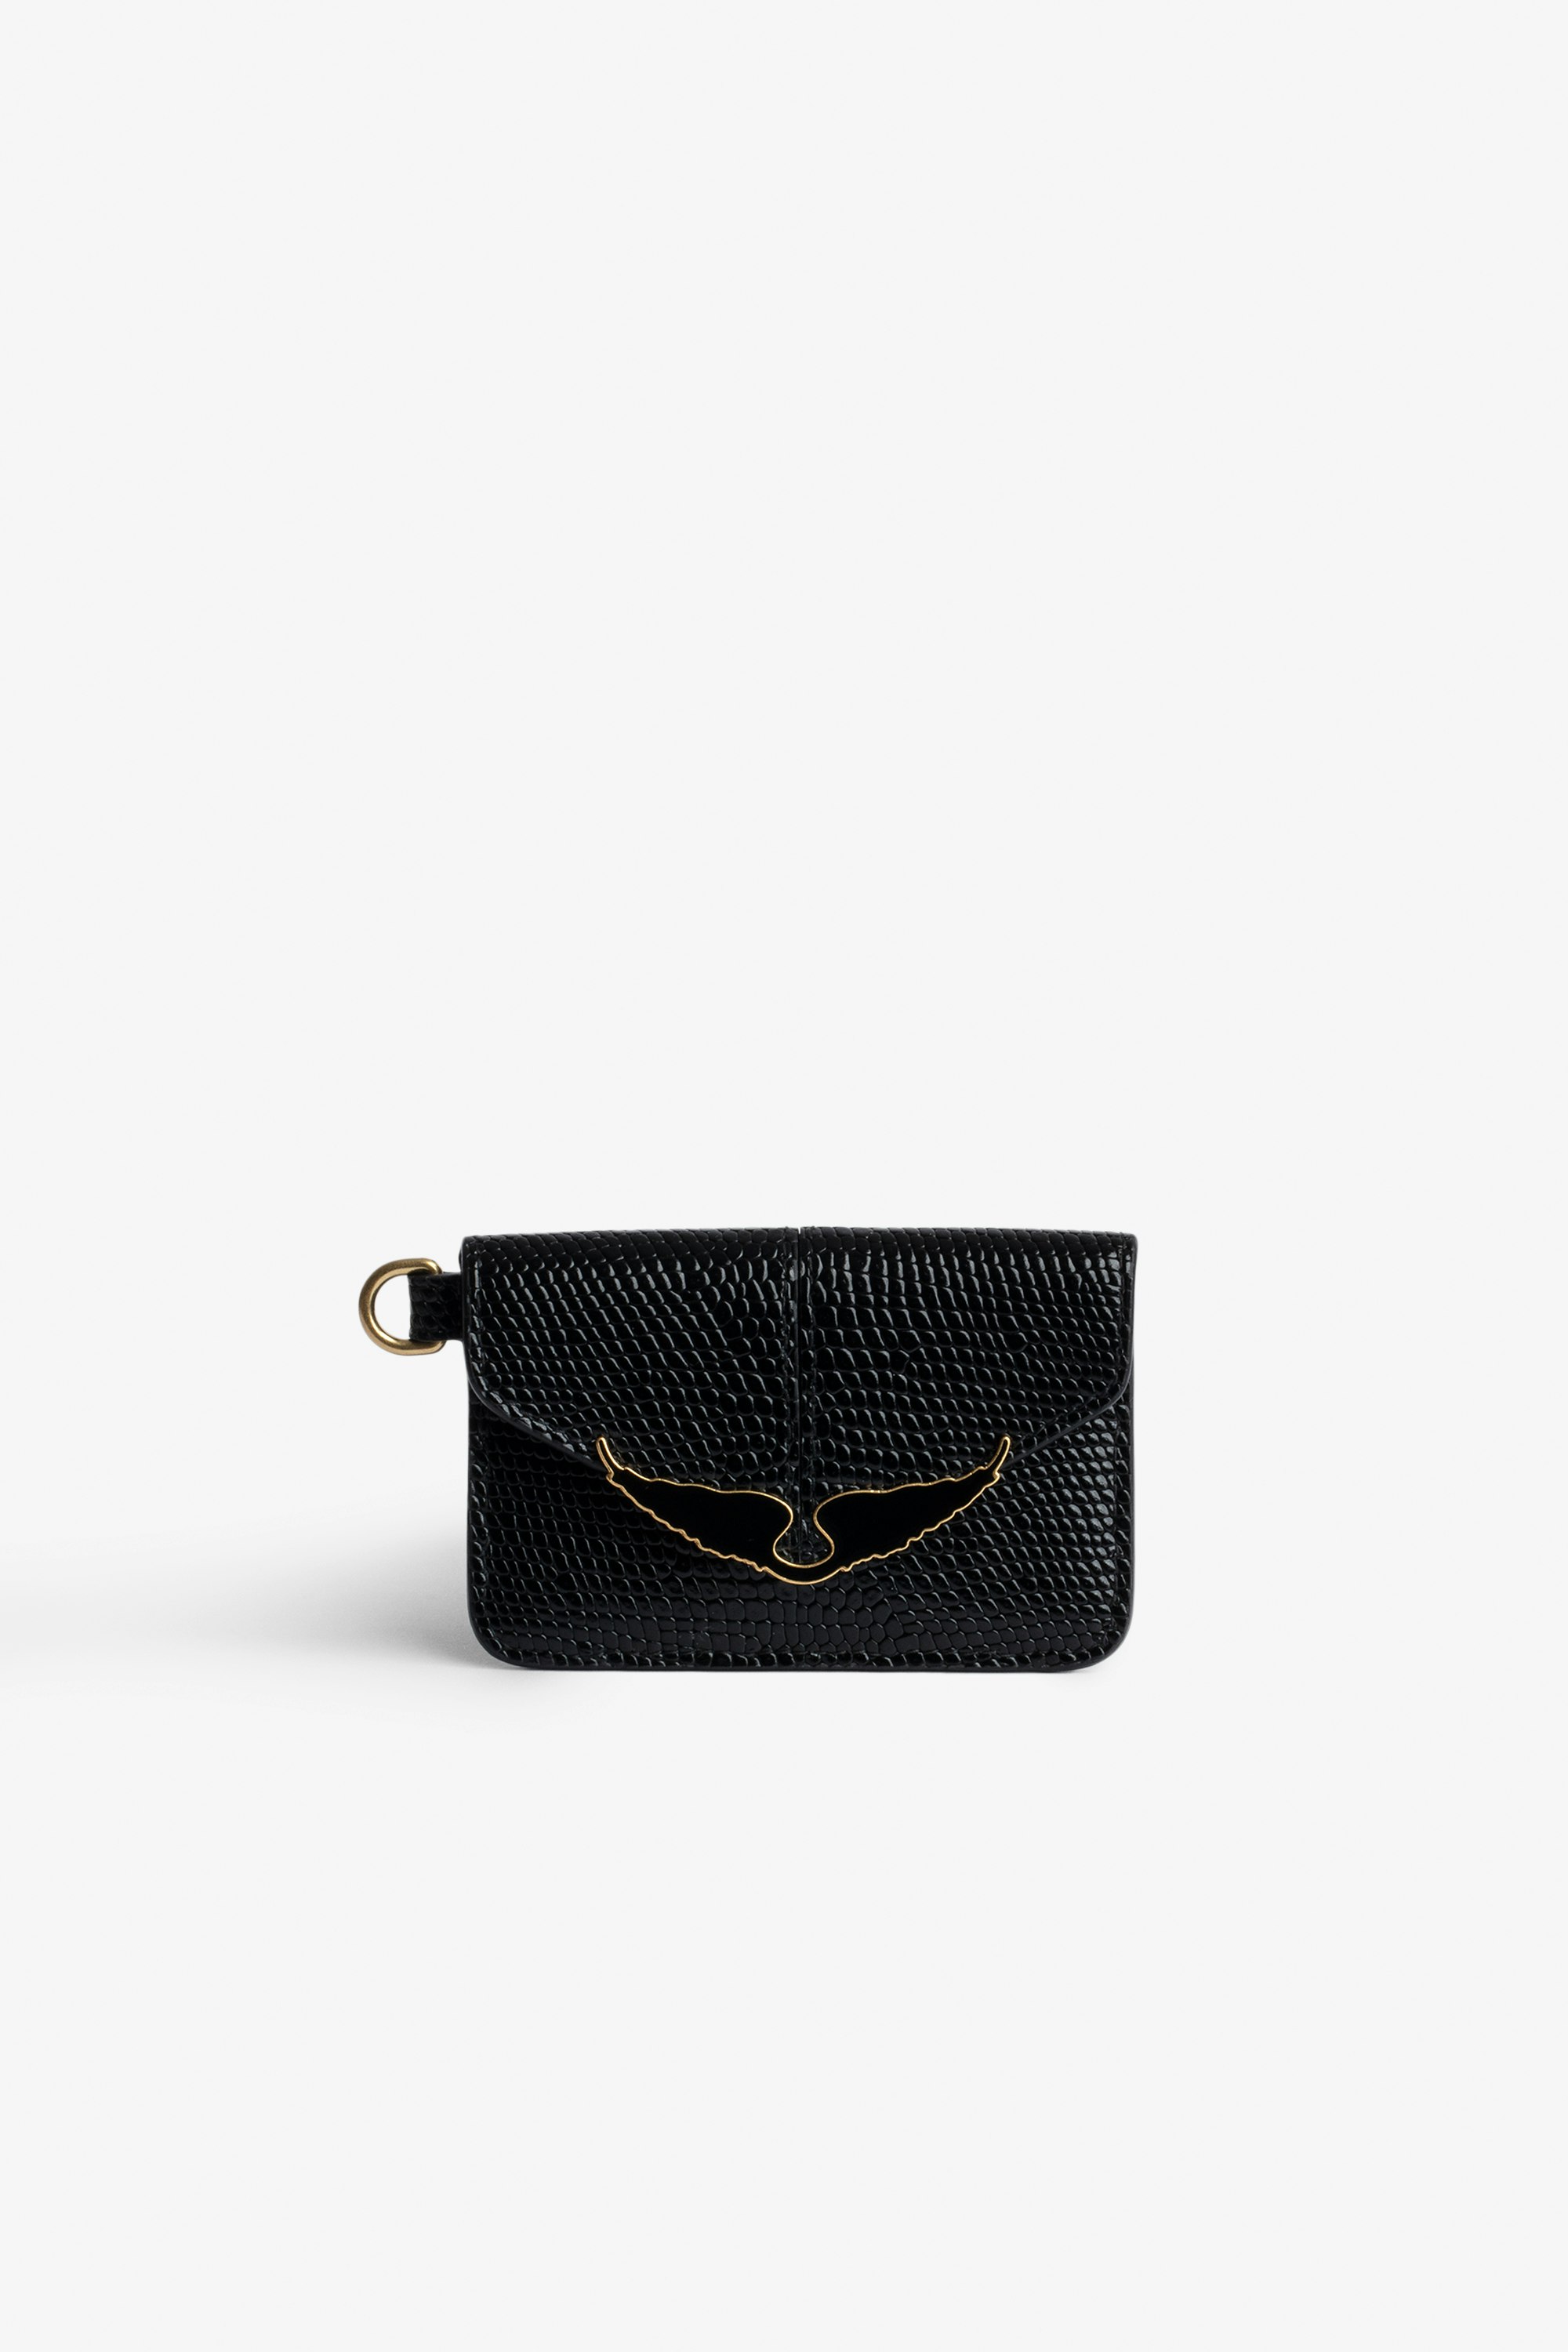 Borderline Pass Card Case - Women’s card case in shiny black leather with embossed iguana and black lacquered wings on the clasp